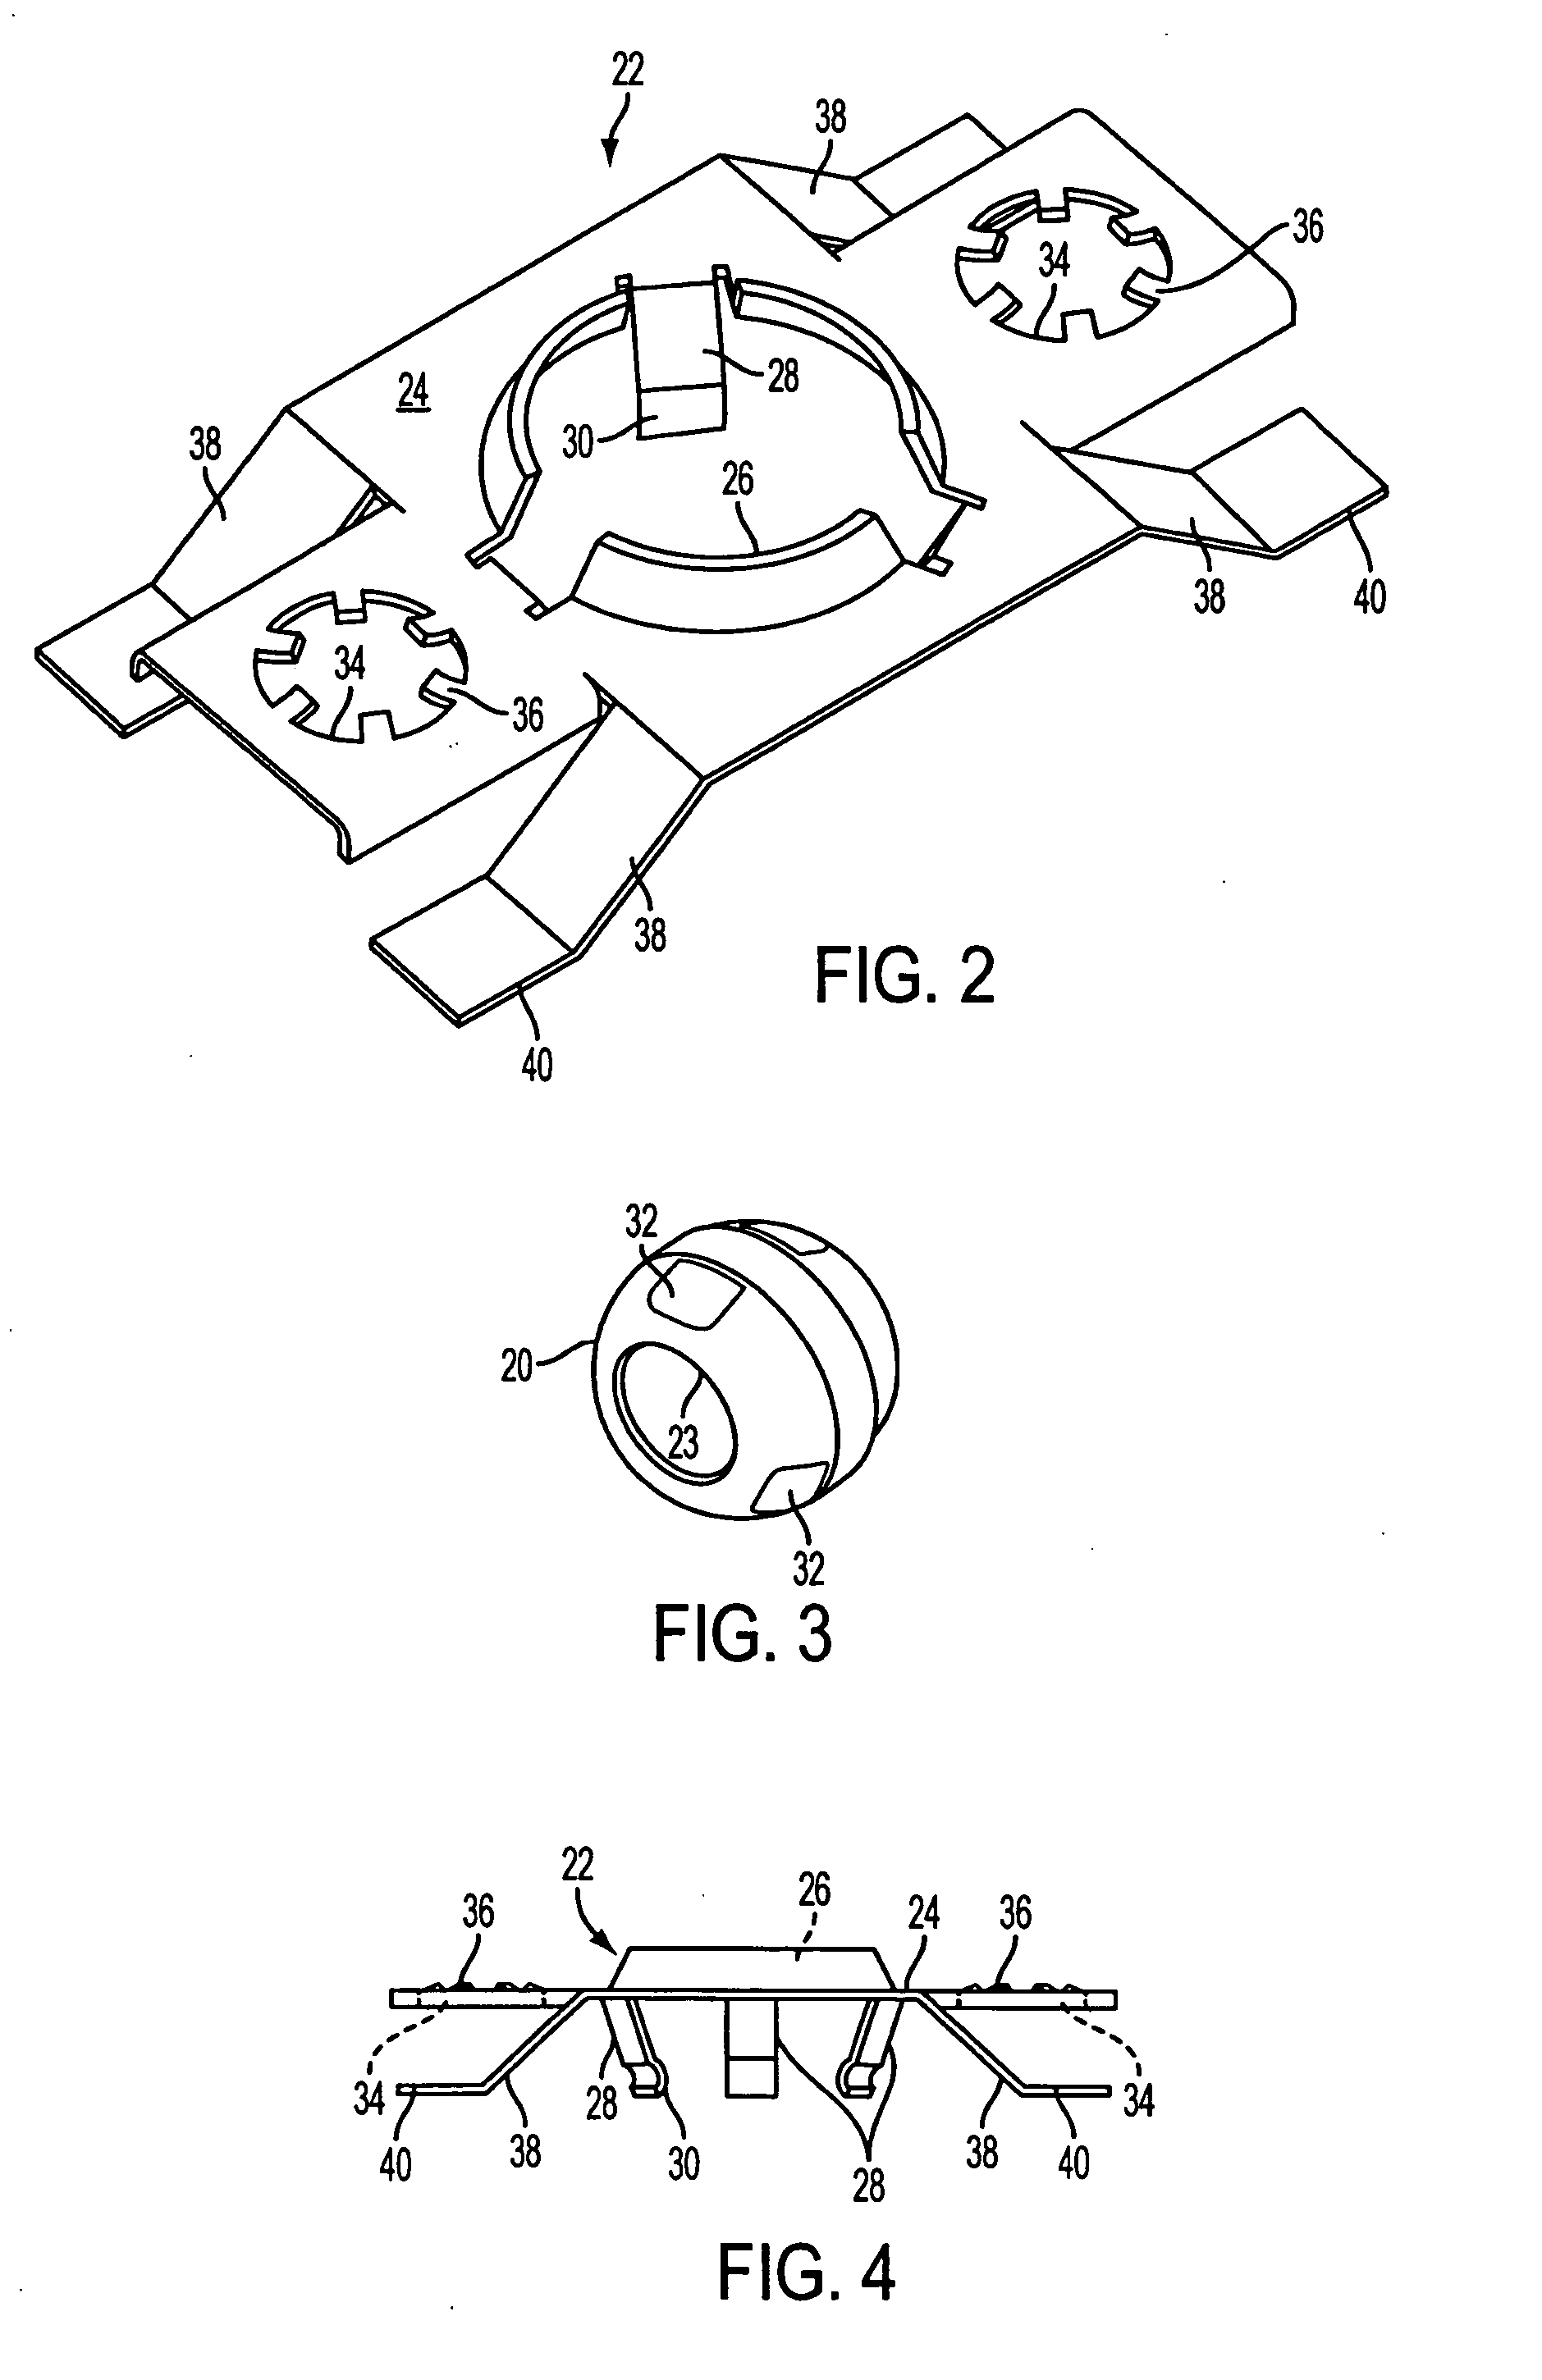 Endplay adjustment and bearing decoupling in an electric motor